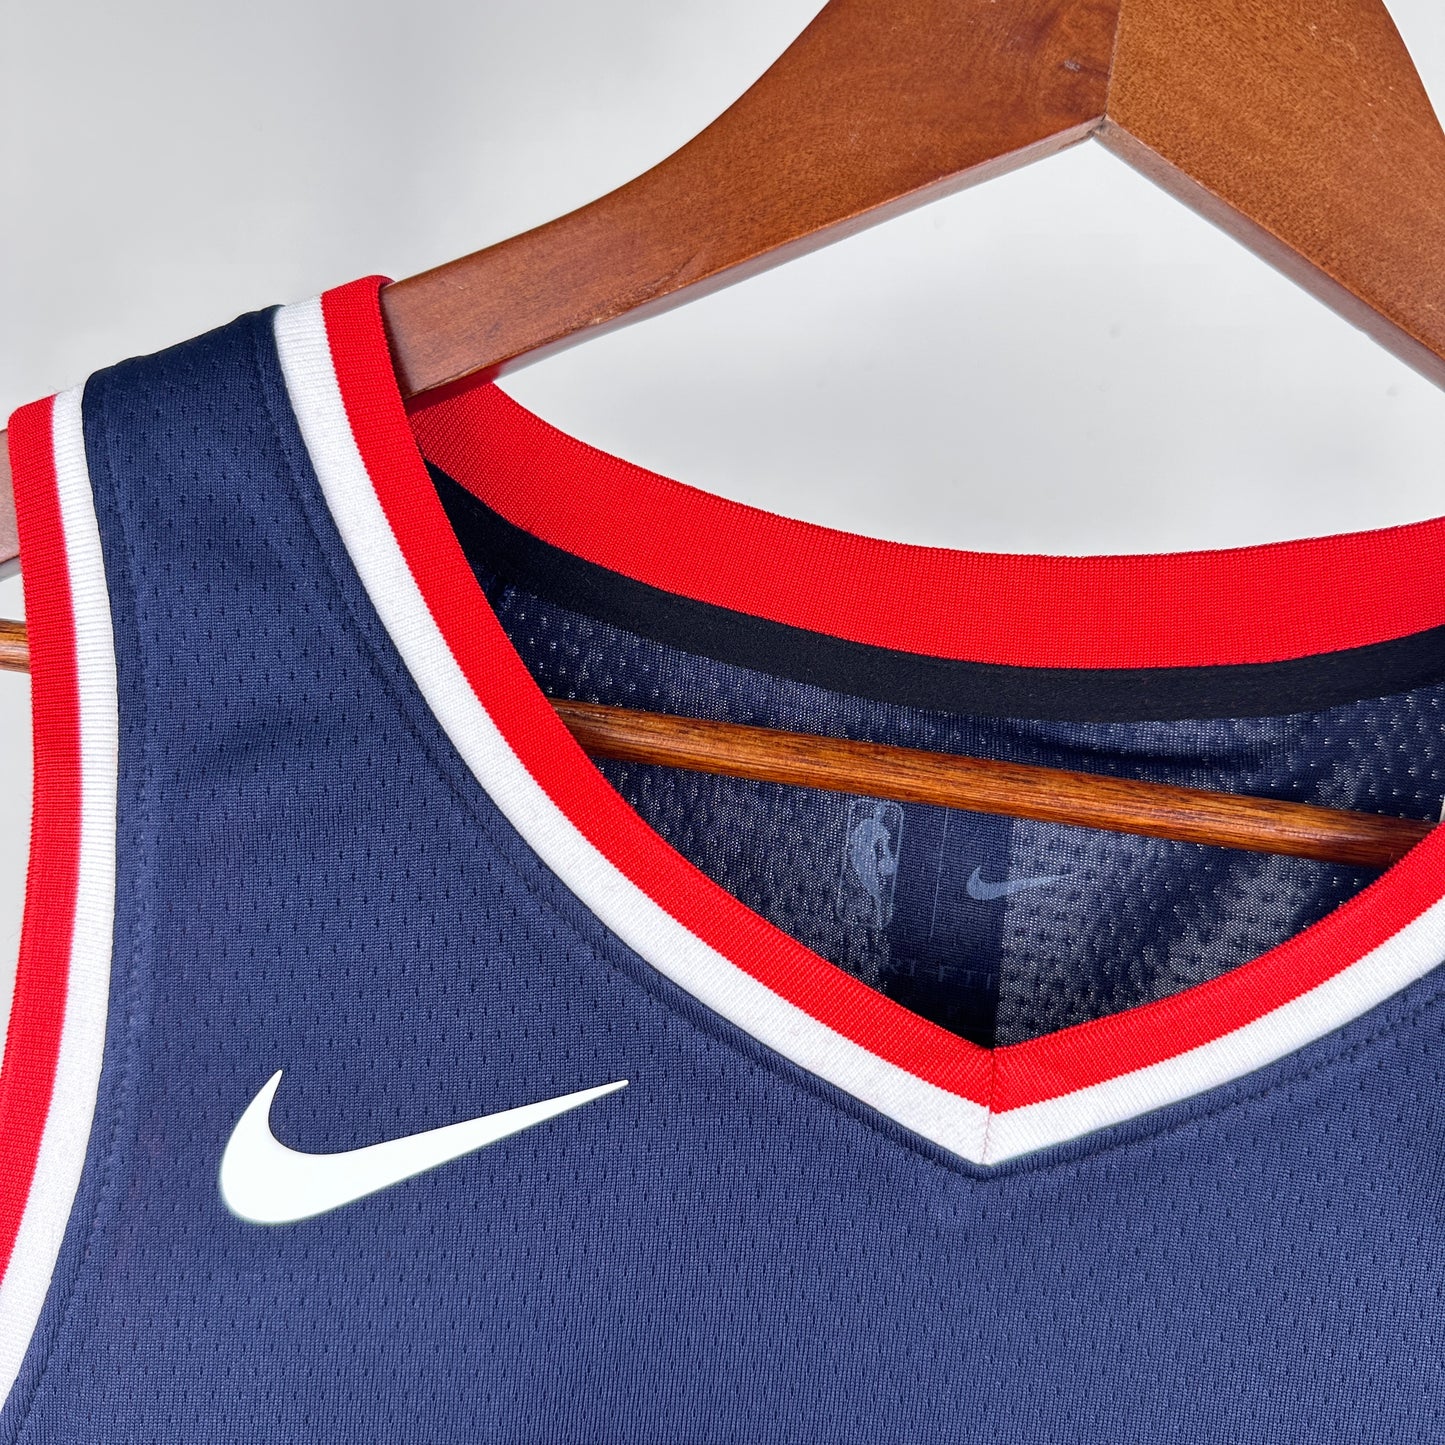 Paul George Los Angeles Clippers 2024/25 Official Nike City Edition NBA Swingman Jersey - Navy